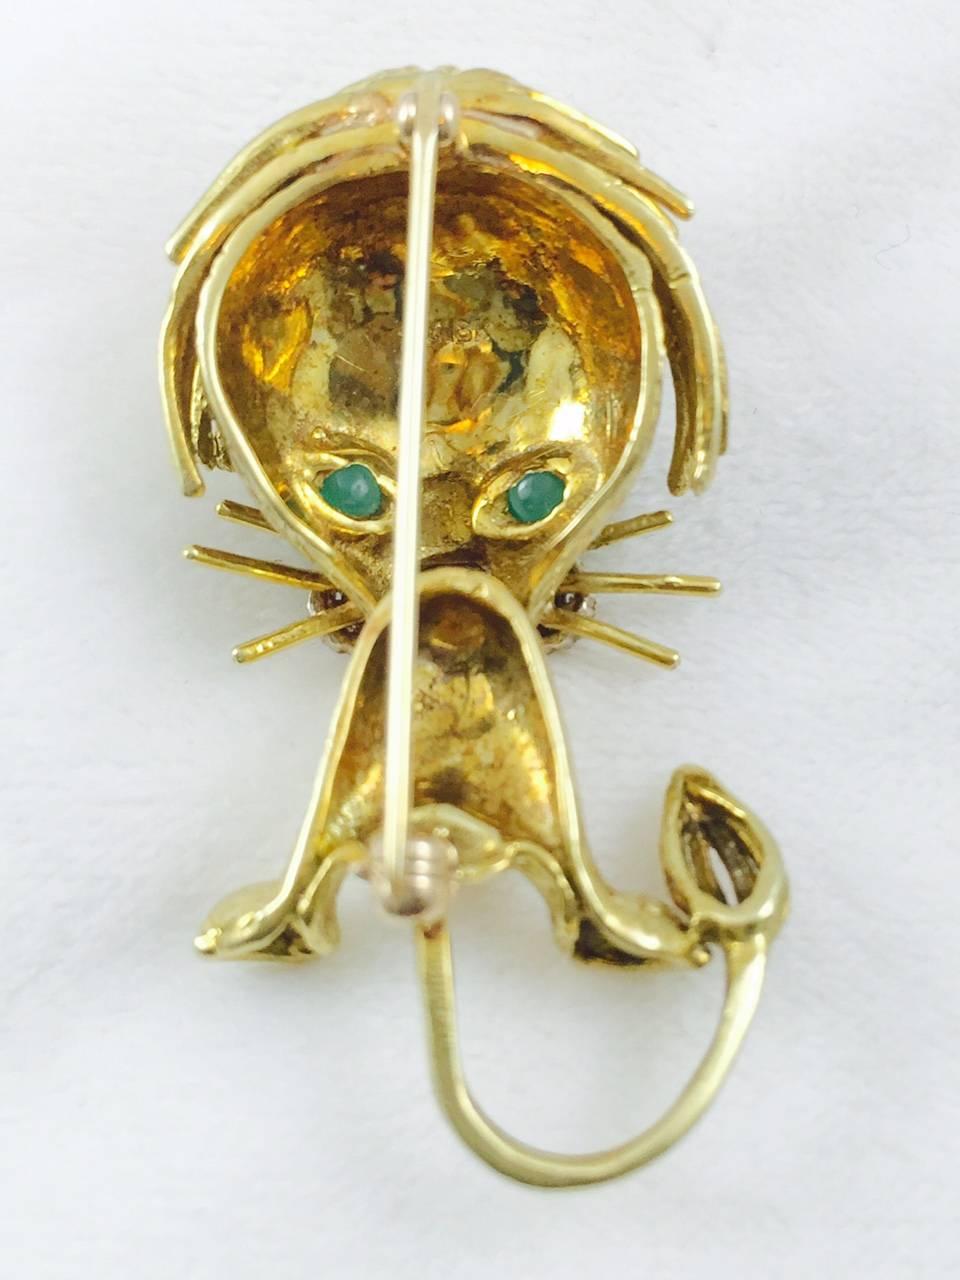 Whimsical and wonderful, this lion brooch would be a fantastic addition to any fine jewelry collection.  Hammerman Bros., since 1946, has been a prestigious jewelry and design house catering to prominent jewelers world wide.  Their impeccable